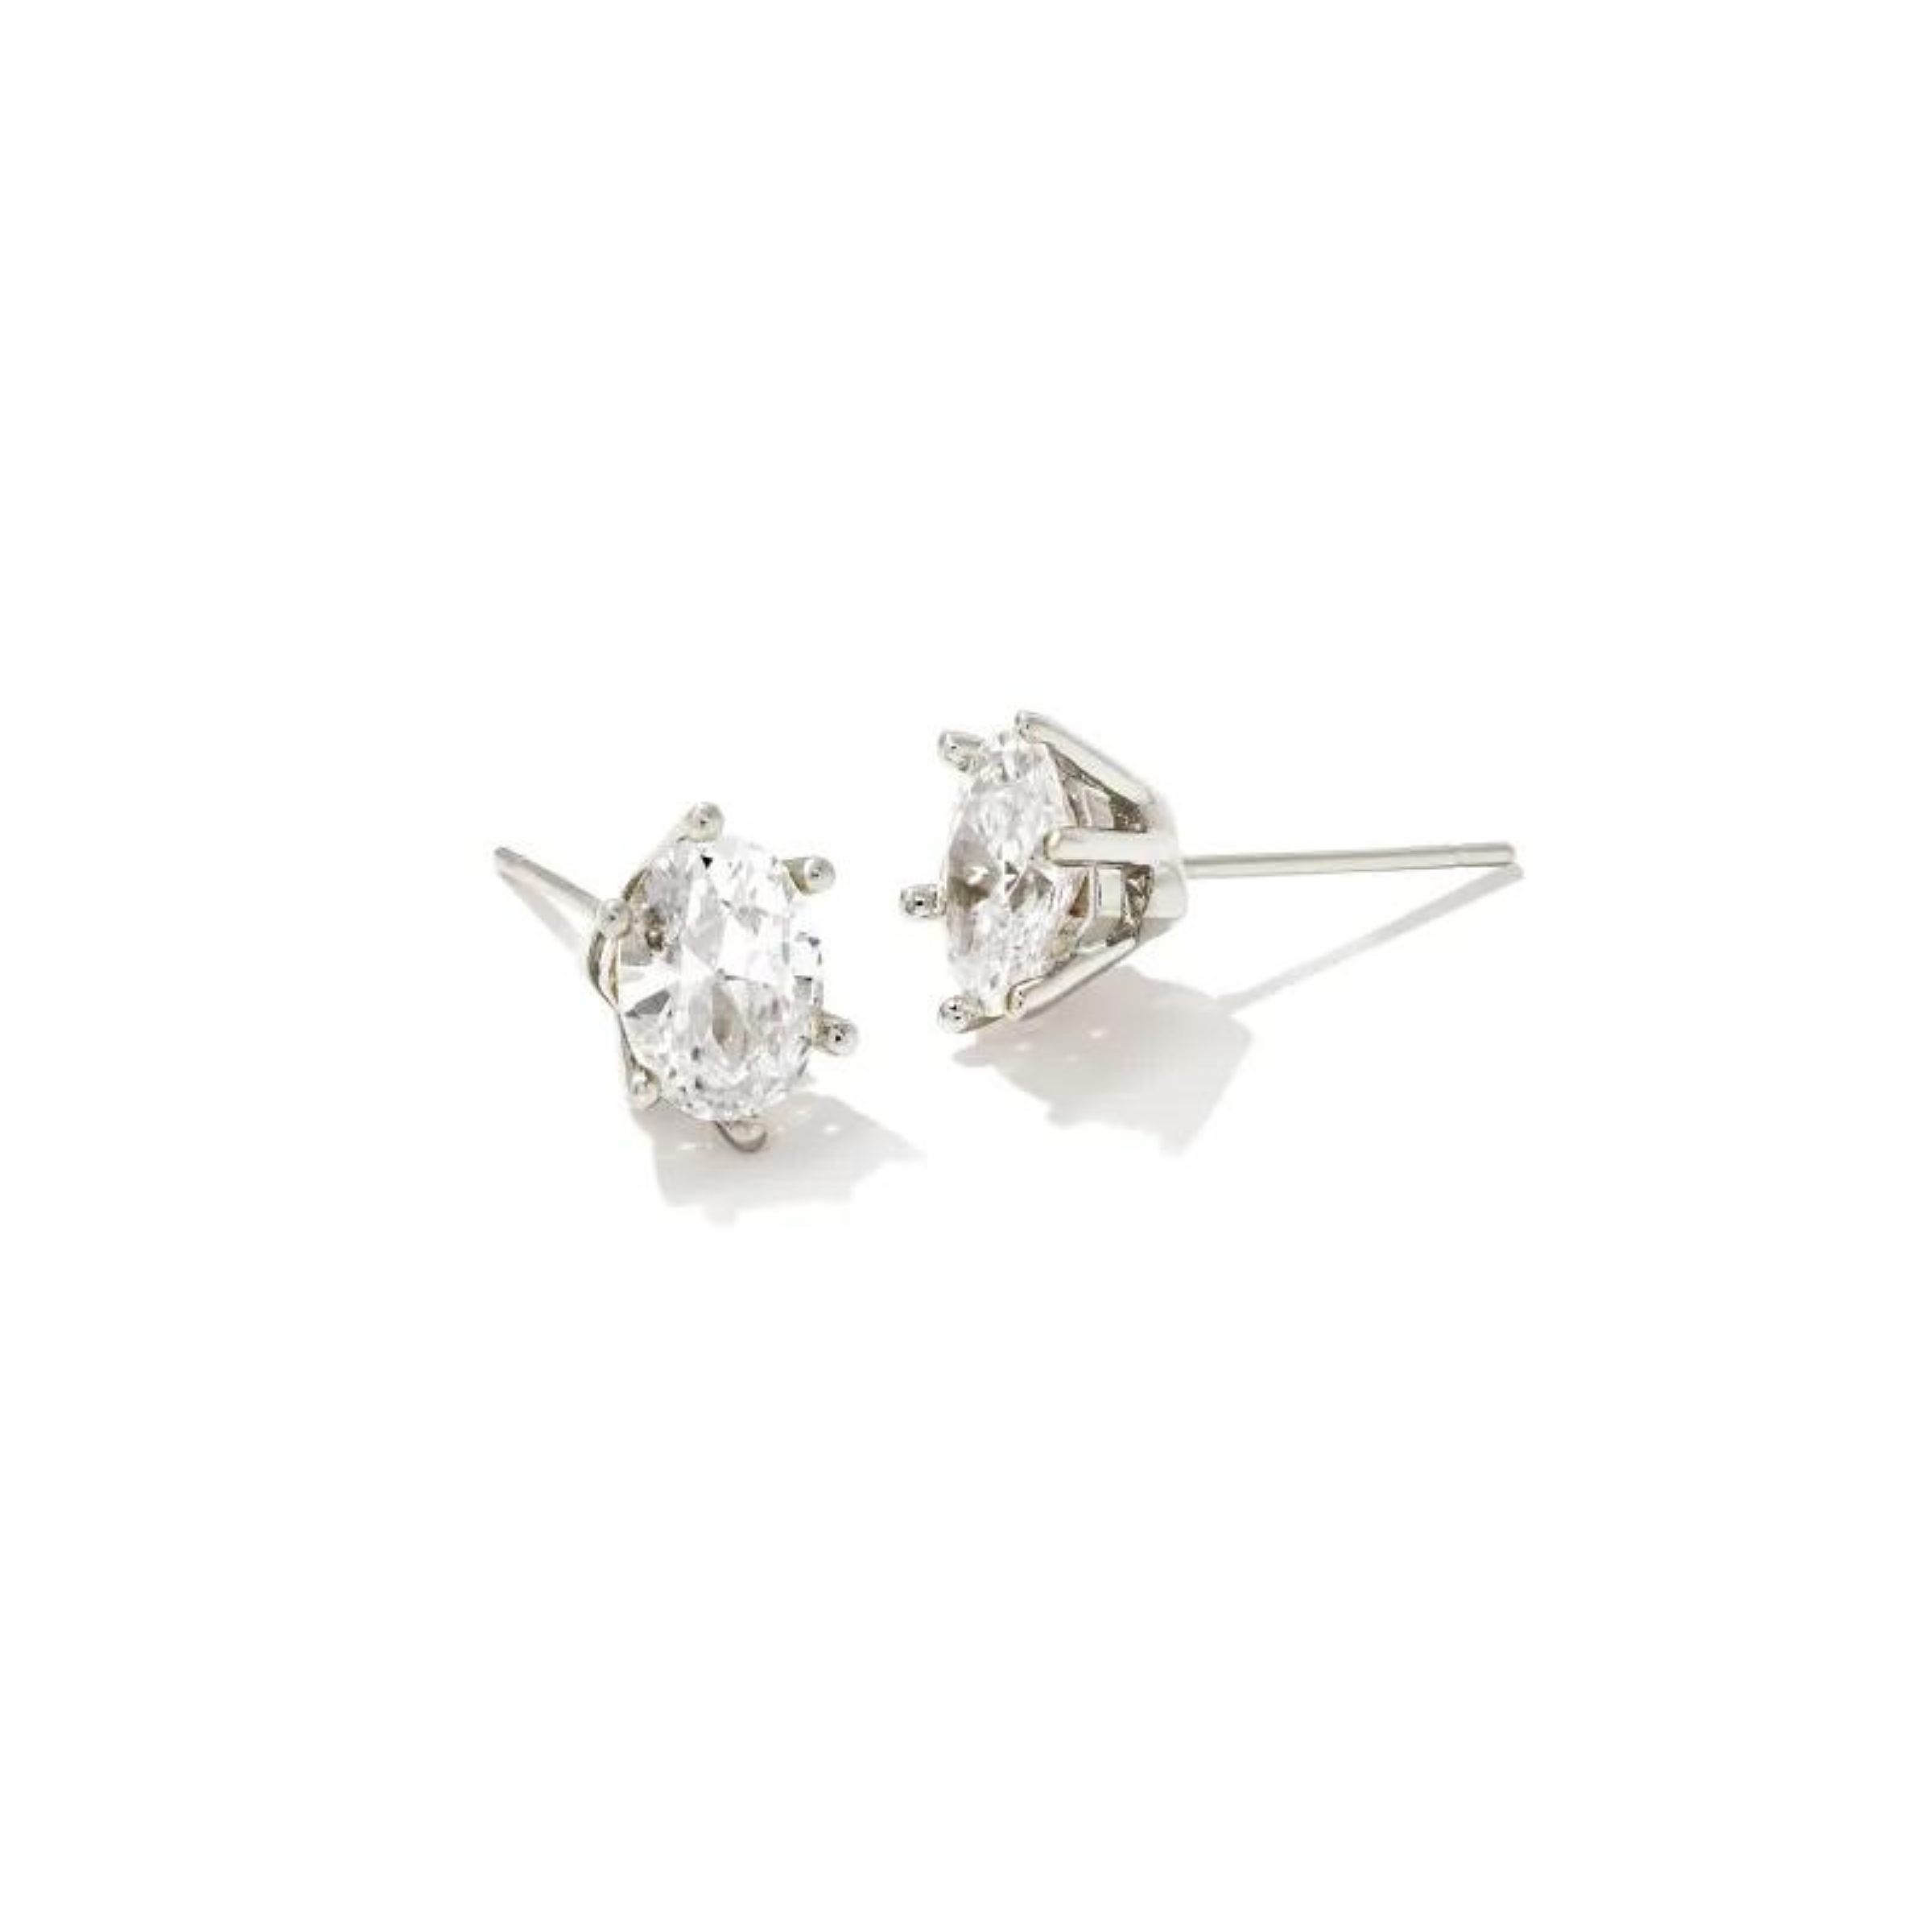 Pictured on a white background is a pair of silver stud earrings with a single oval, clear crystal. 